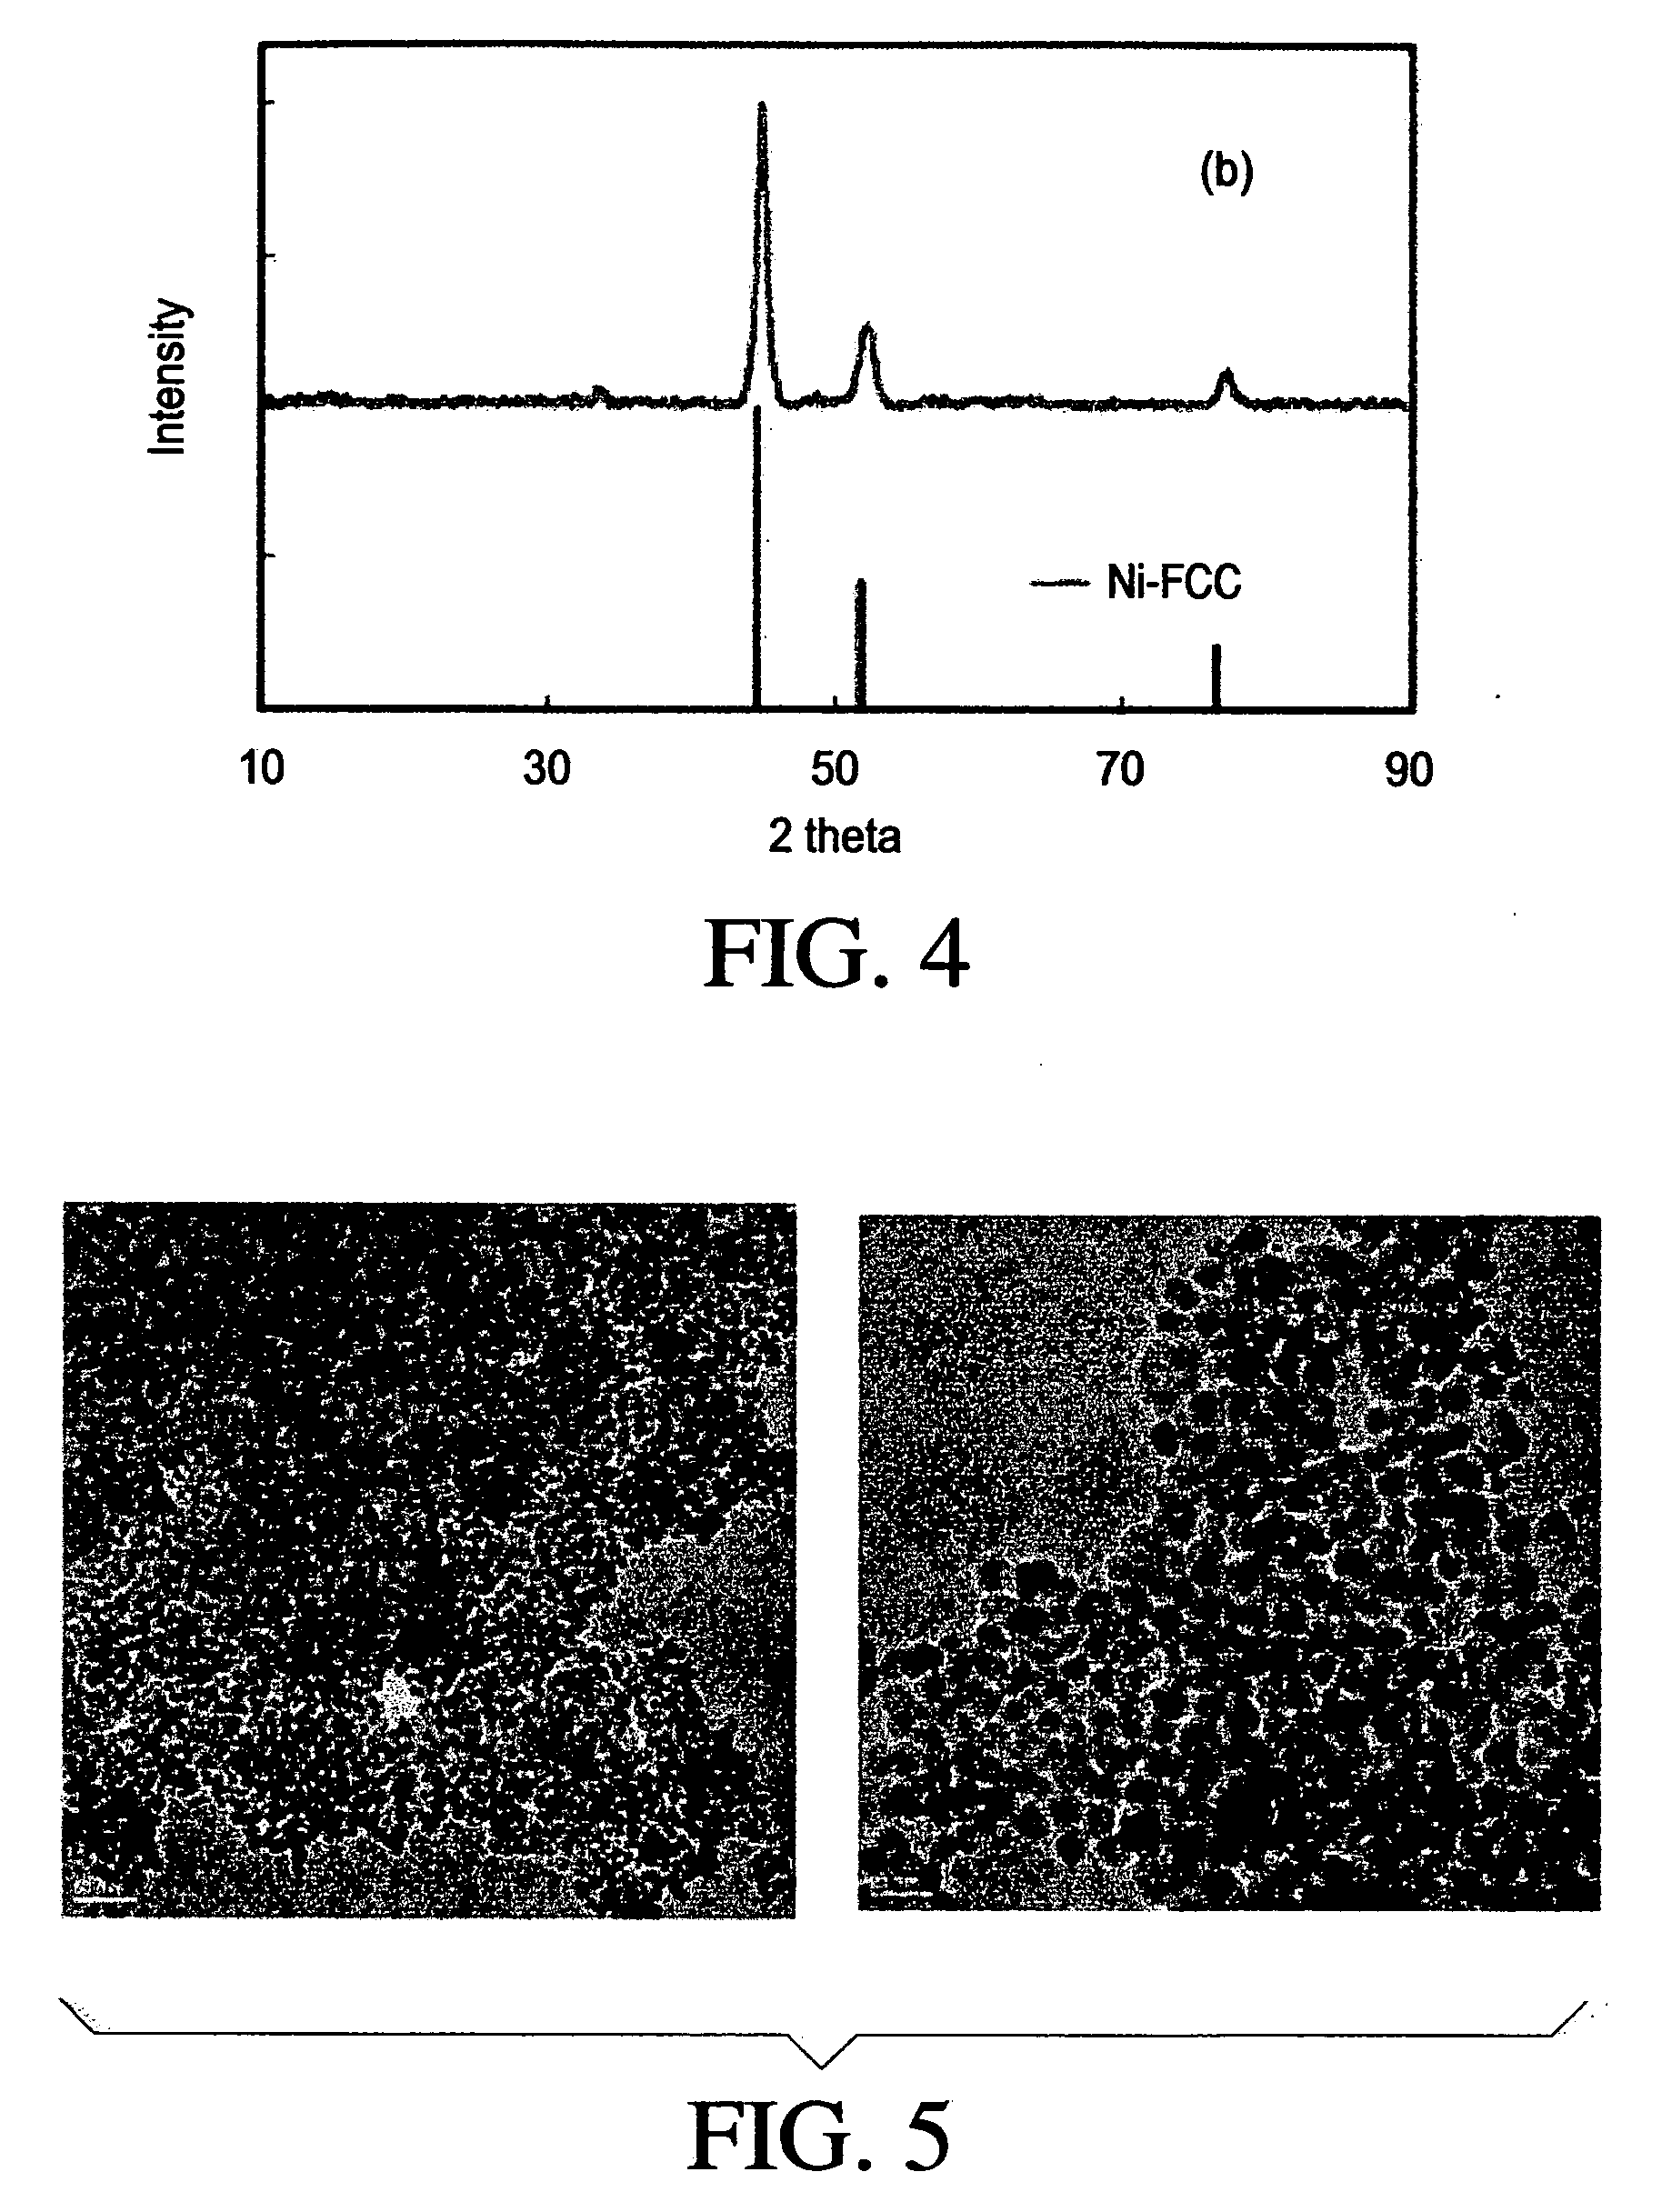 Production of metal nanoparticles from precursors having low reduction potentials